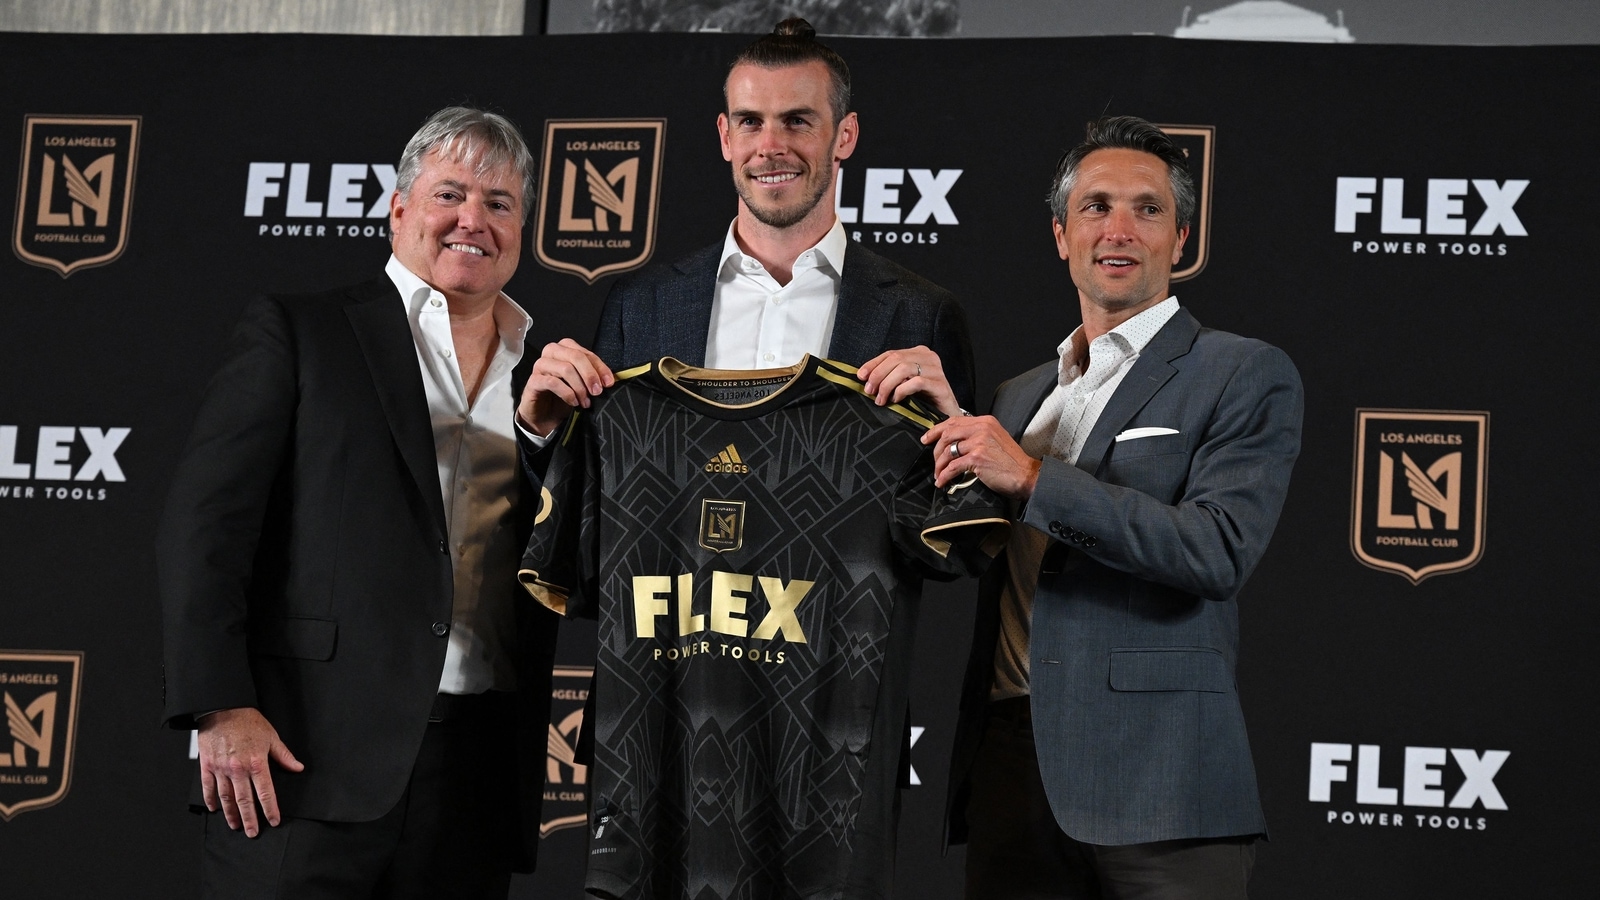 Gareth Bale says he’s at LAFC to win trophies, not to retire